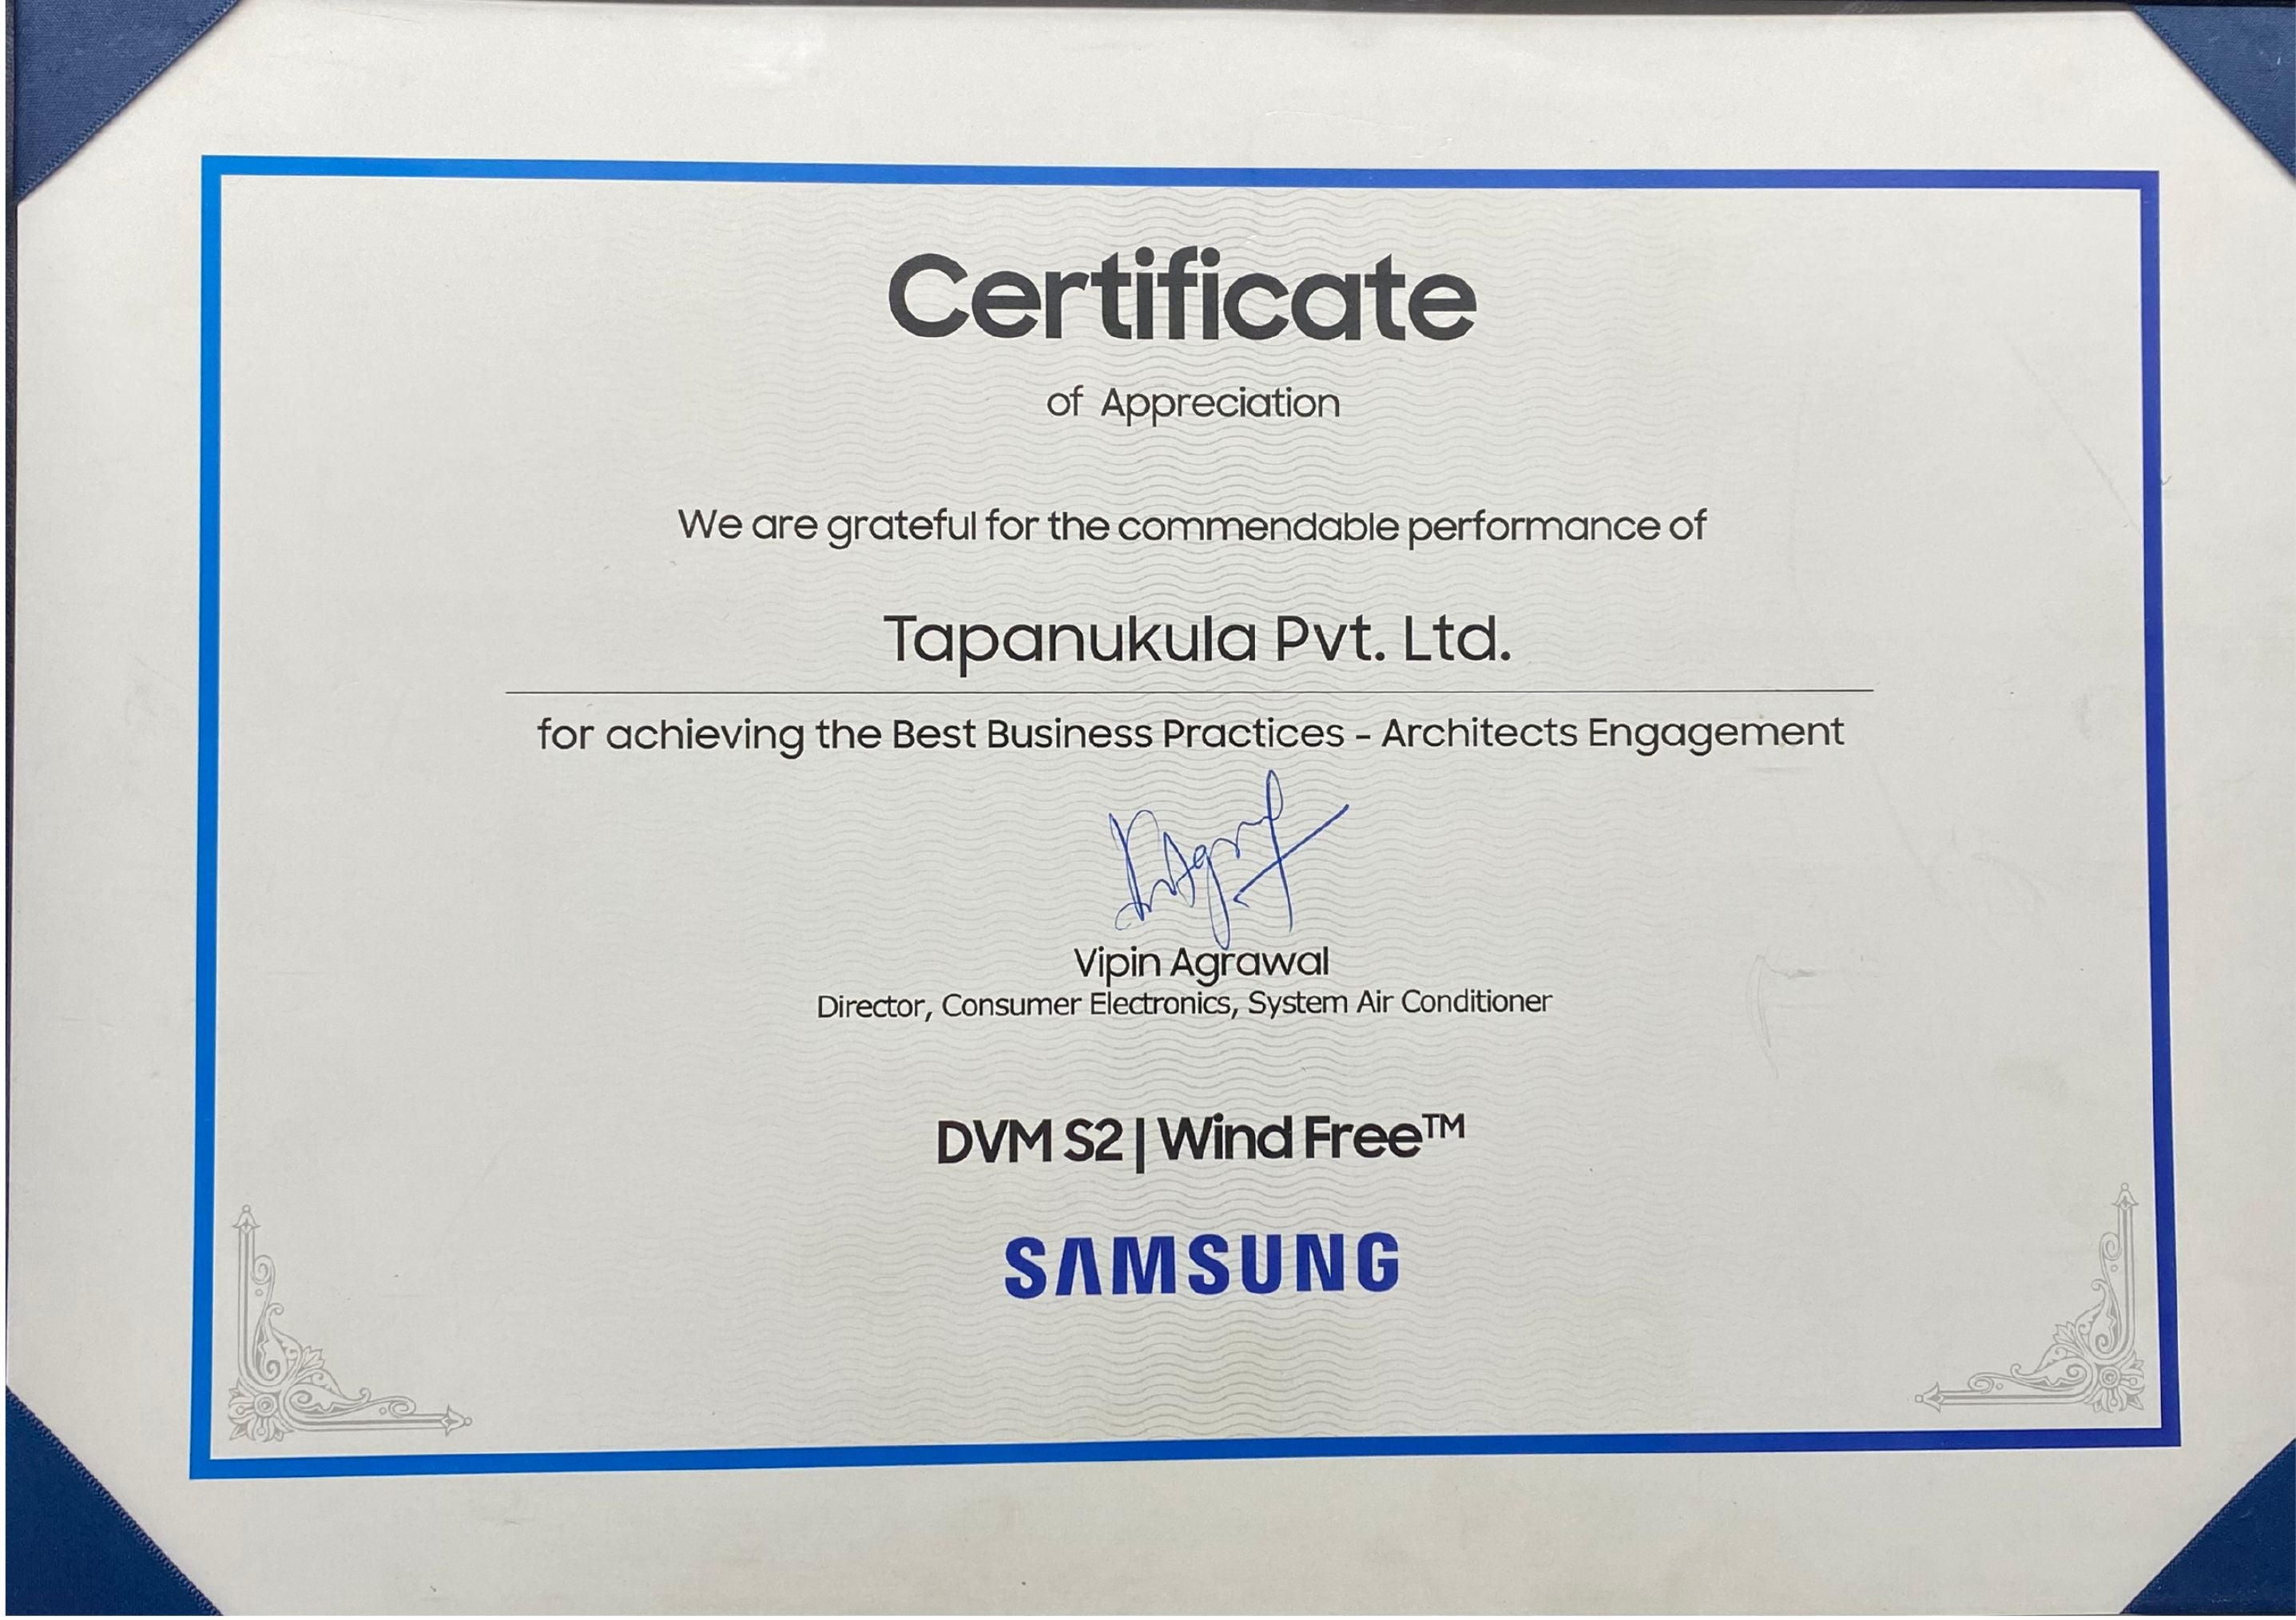 Certificate Of Appreciation To Tapanukula Pvt Ltd By Samsung Air Conditioner